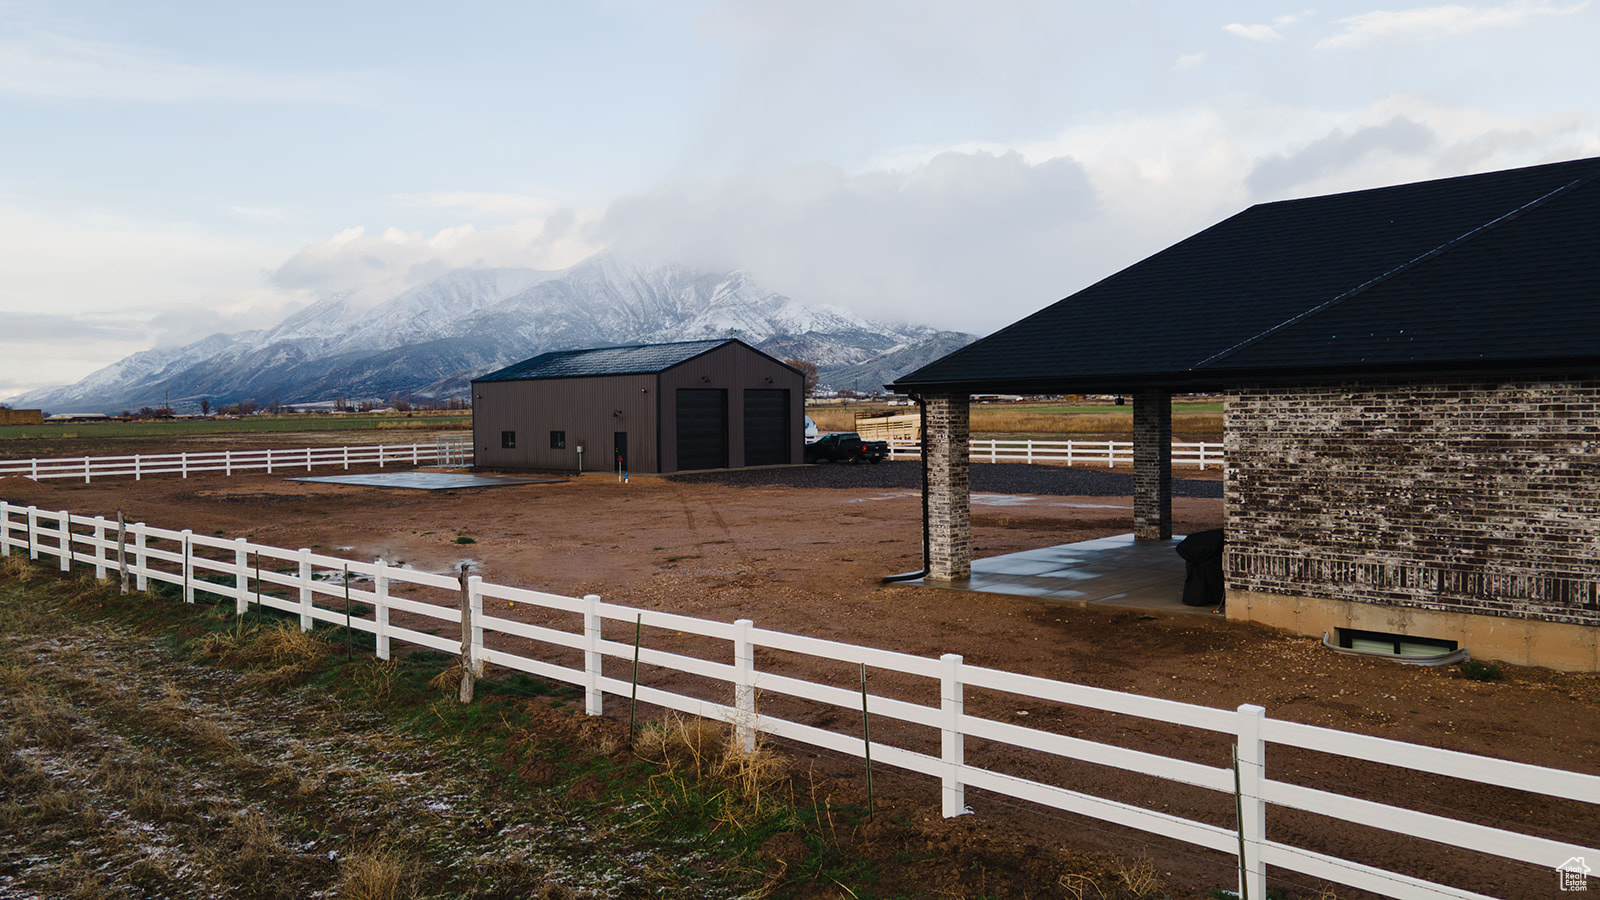 View of stable featuring a mountain view, a rural view, and an outdoor structure